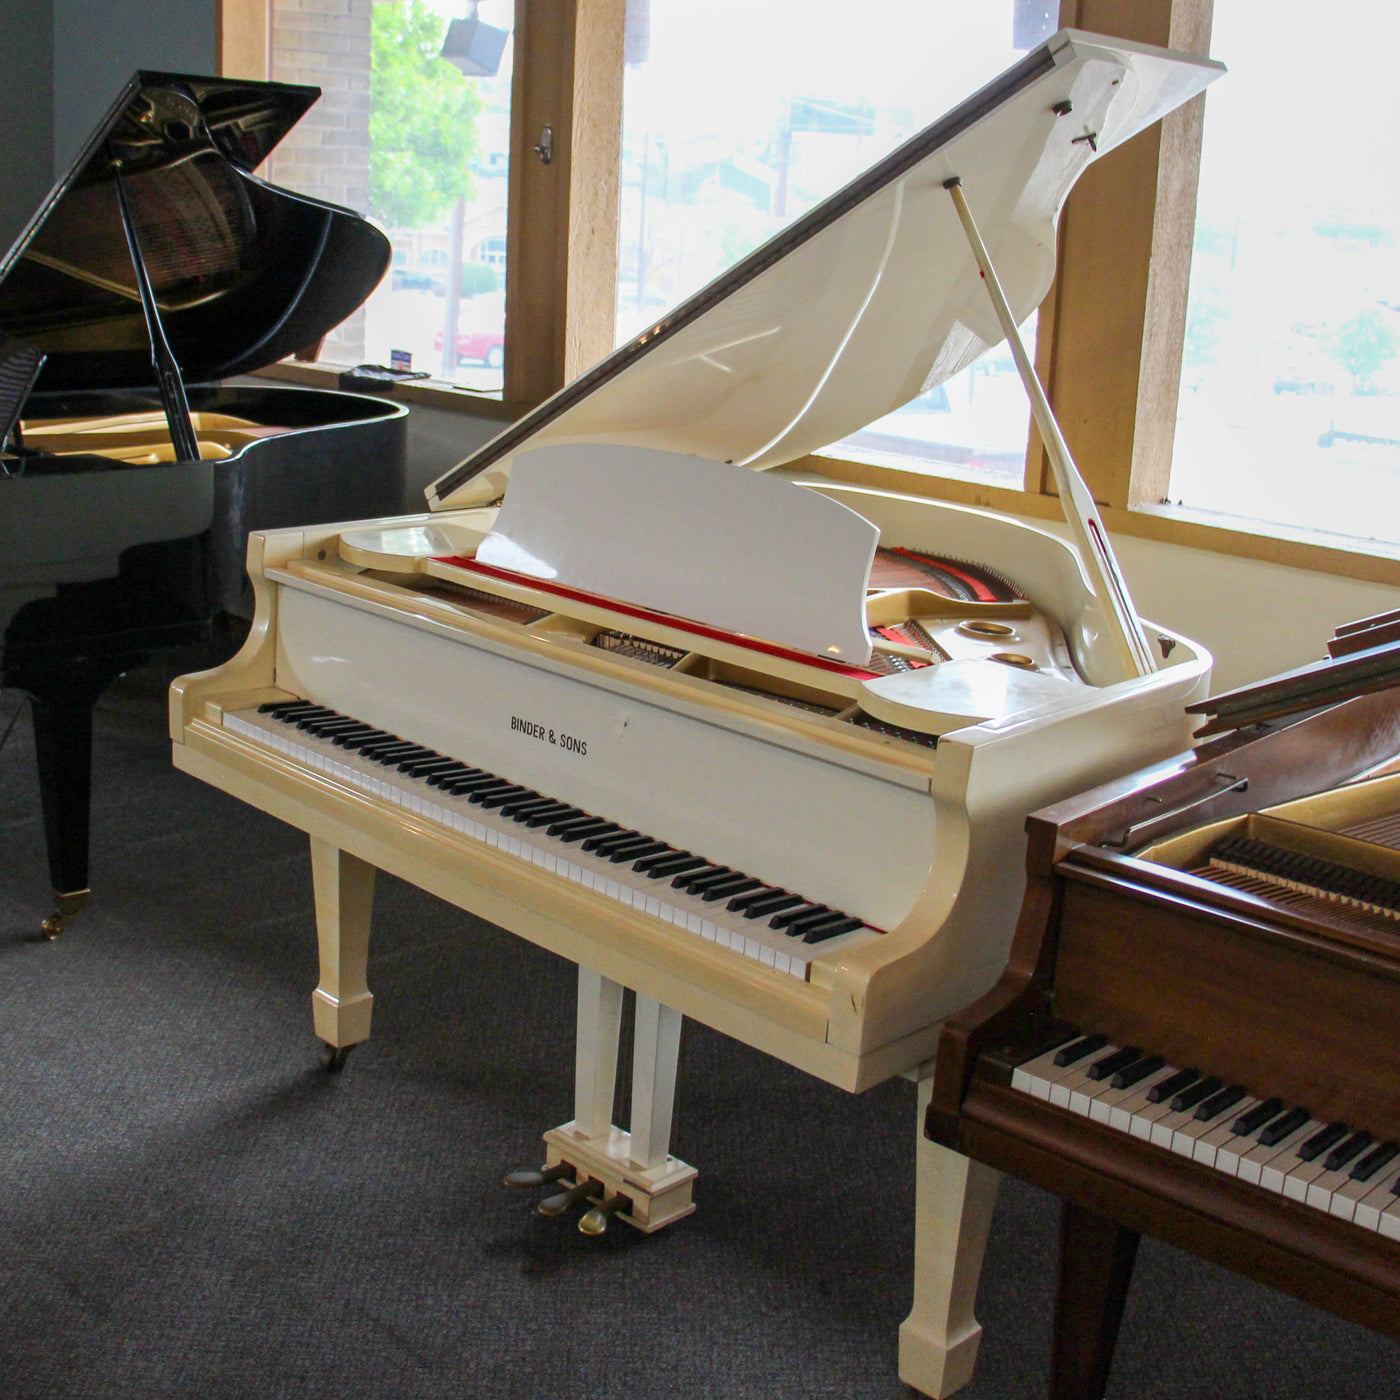 Binder & Sons G-80A 5'1" Ivory Baby Grand Piano | Used